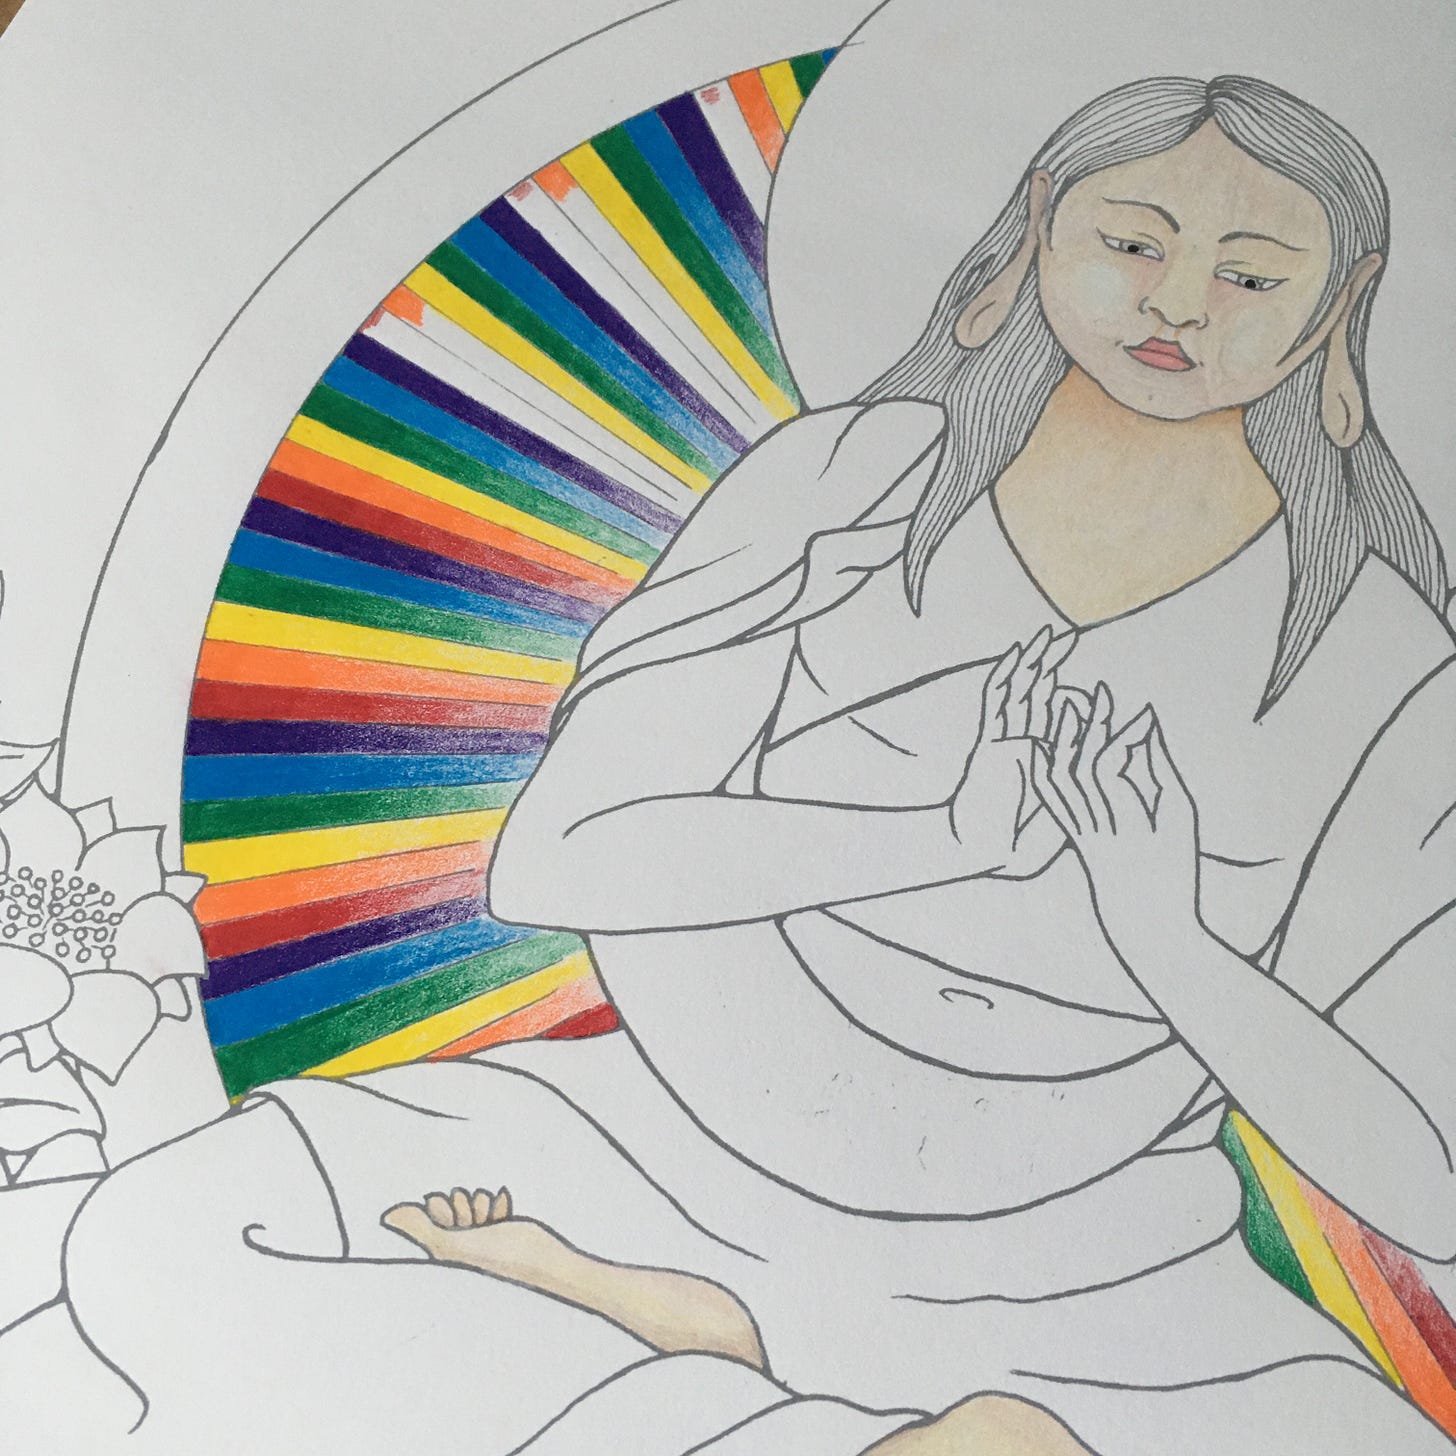 Another photo of the progress of the radiance lines being coloured in behind the seated Vairochana Buddha. The lines are almost complete now, done in rainbow colours with just a few red and orange ones left. 